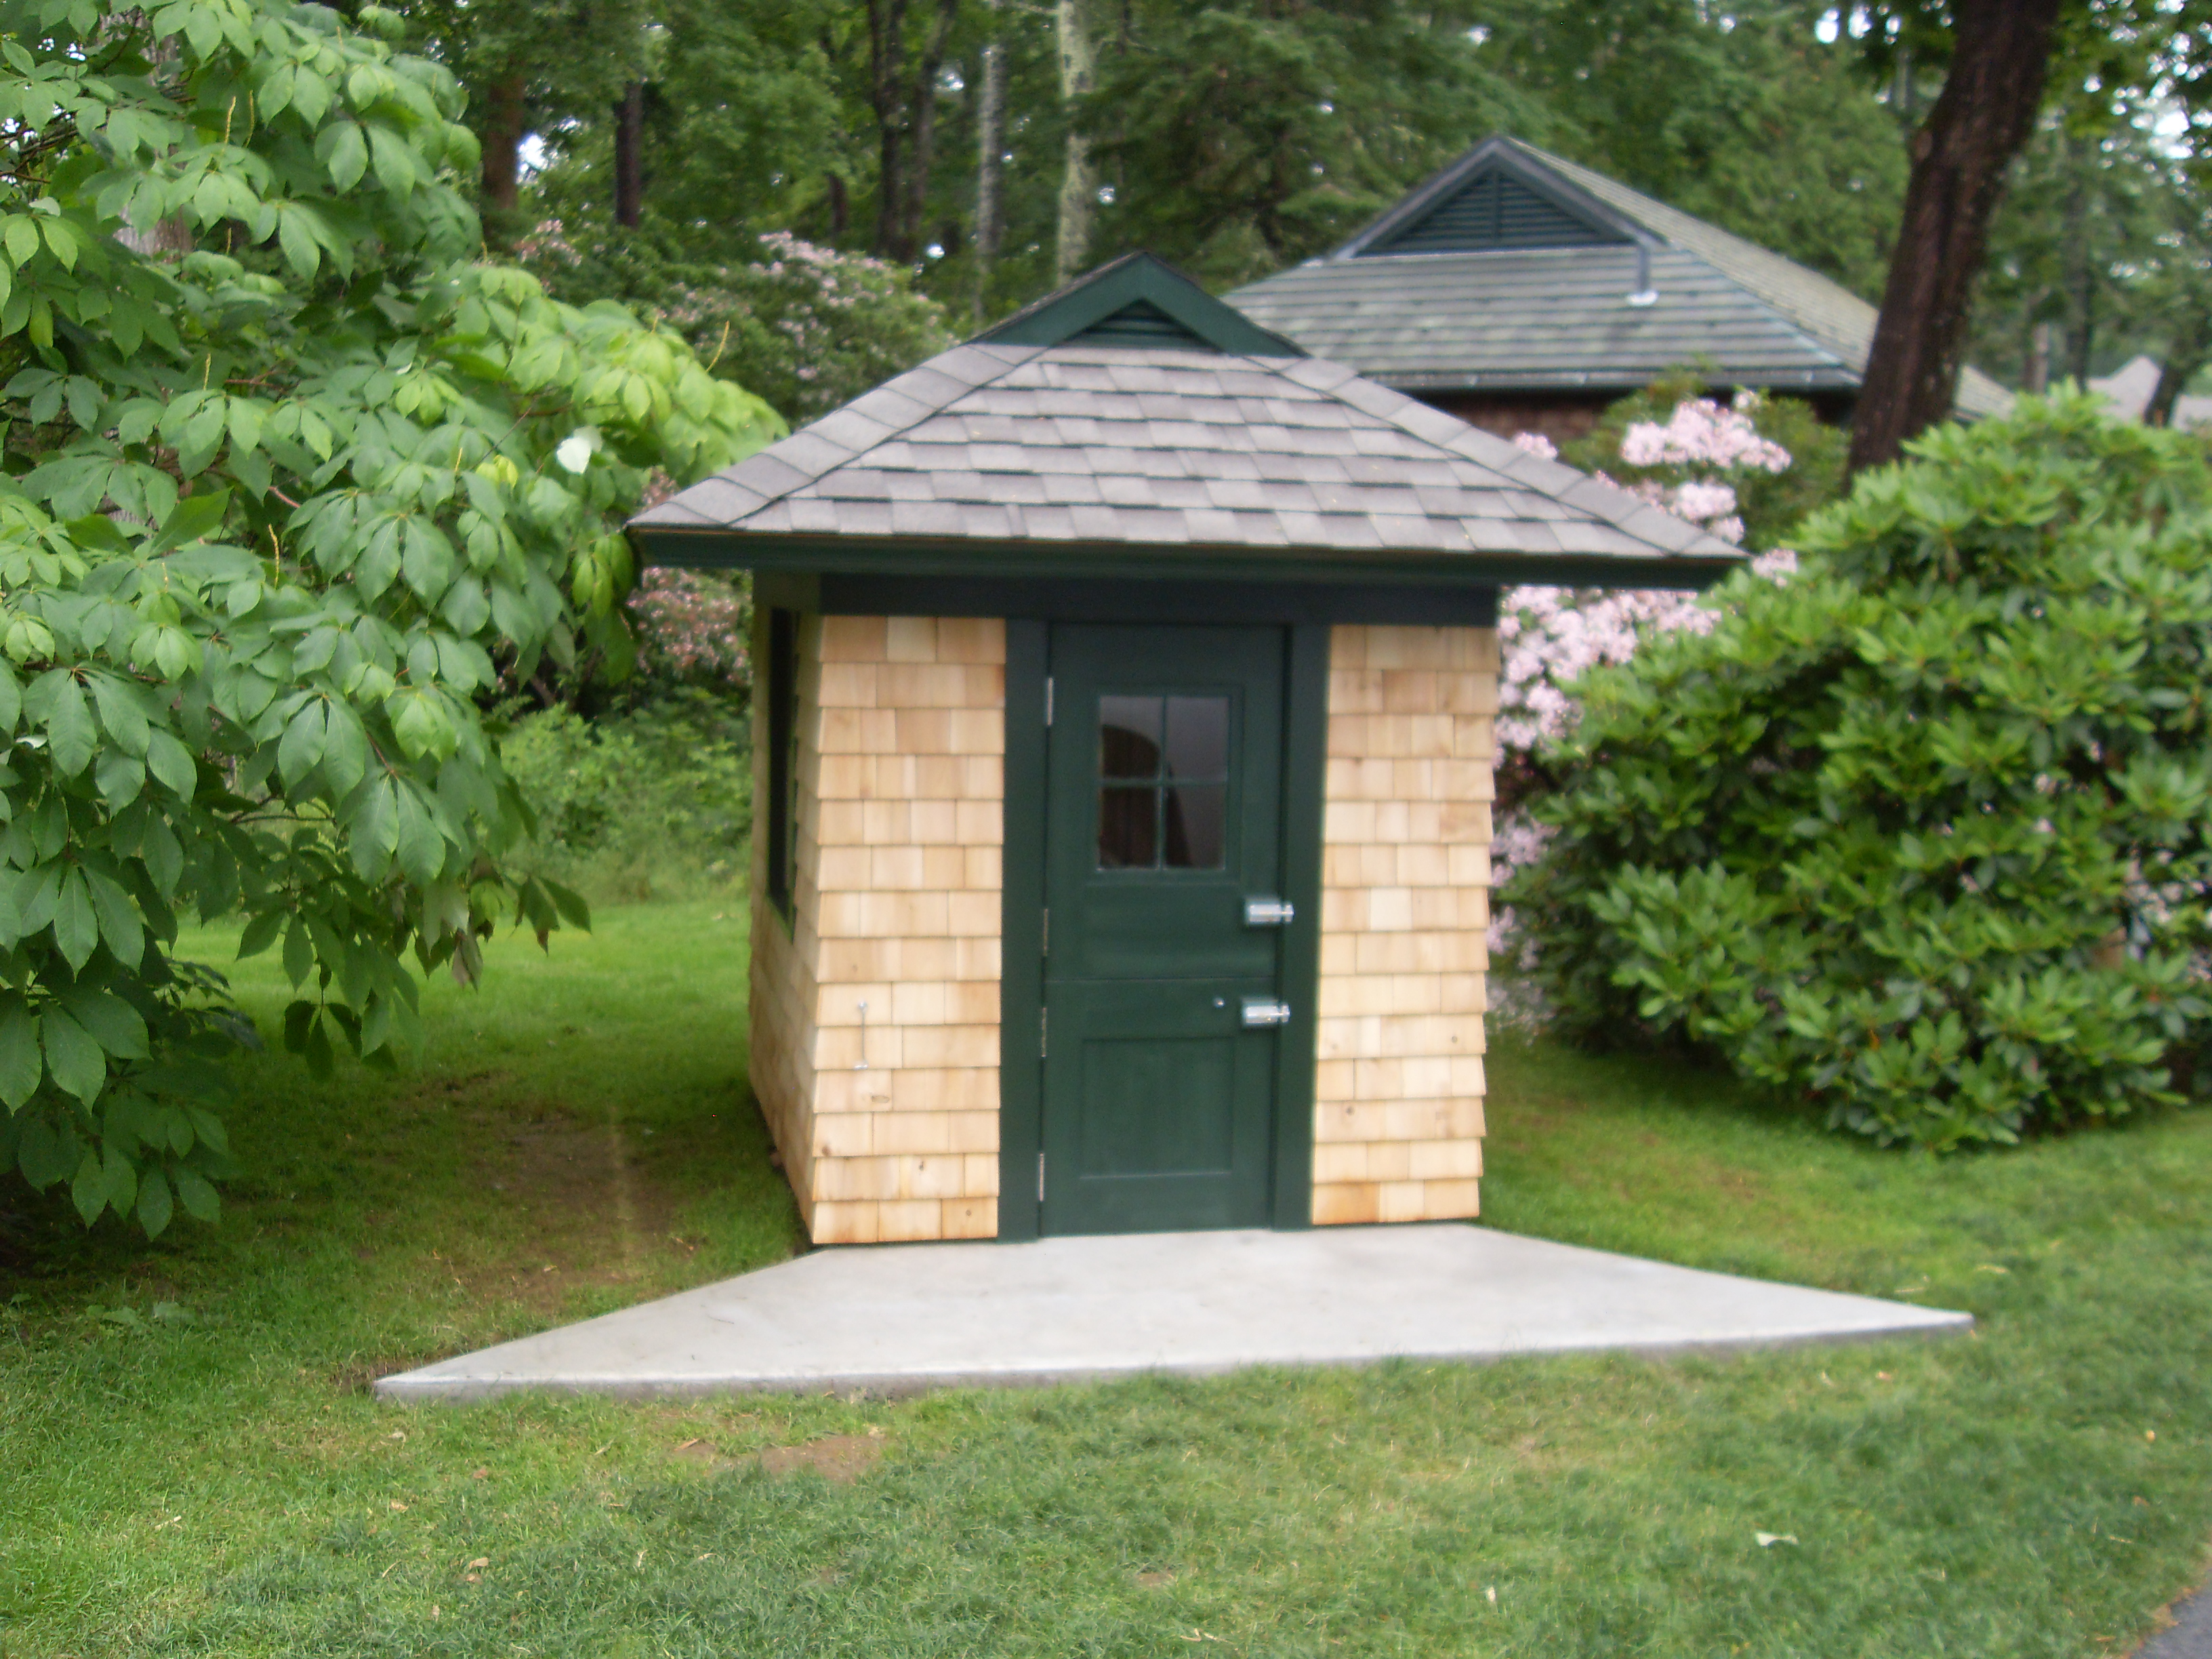 Dog house with roof built to match guest house